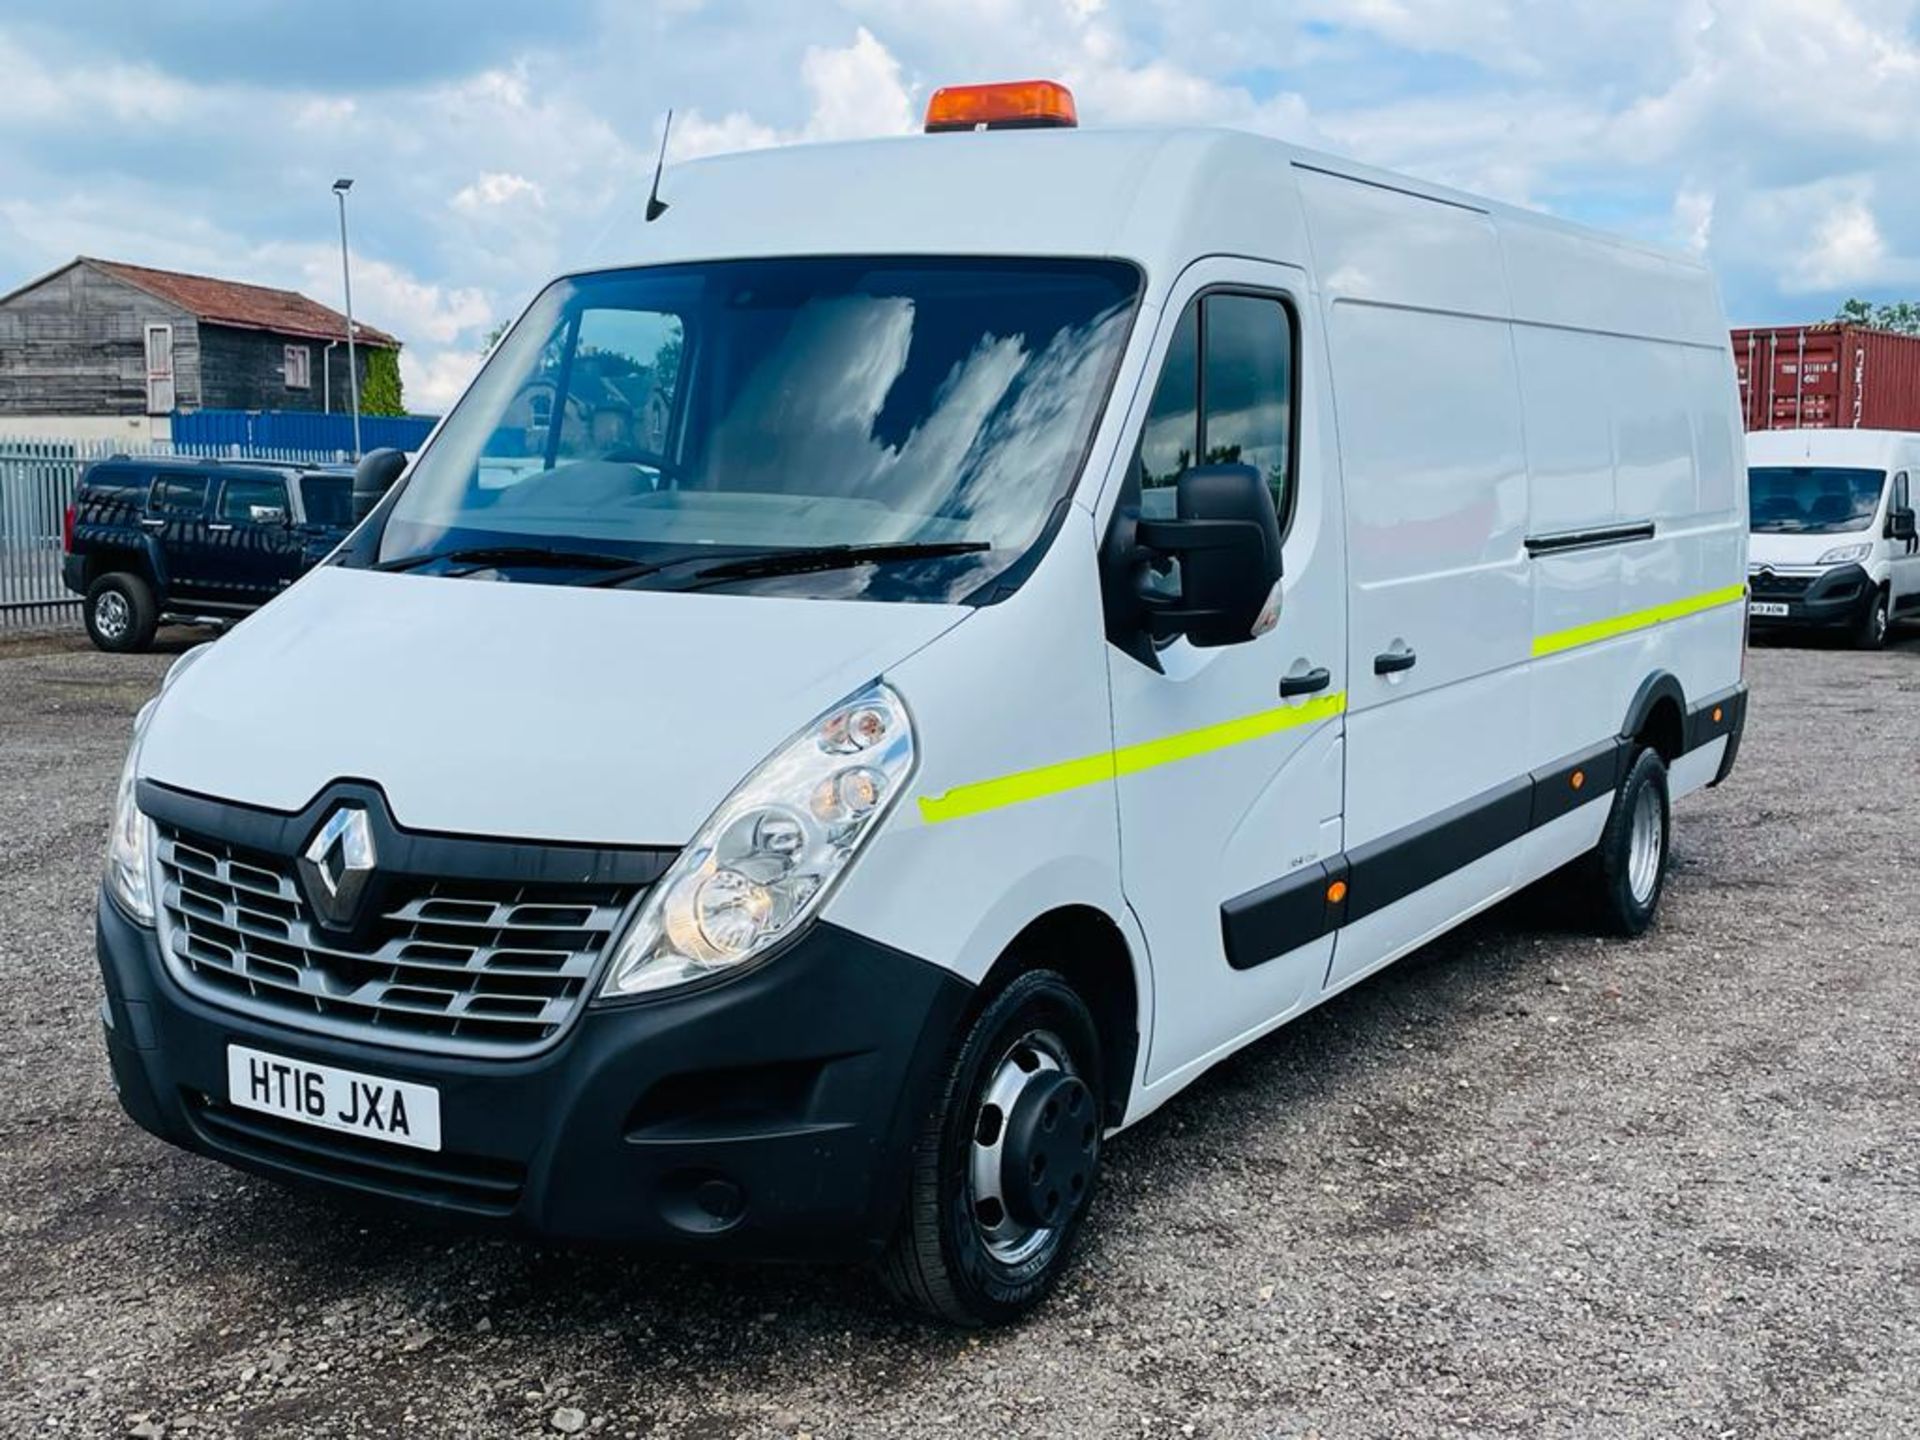 ** ON SALE ** Renault Master 2.3 DCI LMI35 Business L4 H2 RWD 2016 '16 Reg' Twin Rear Axle - 3500kg - Image 3 of 16